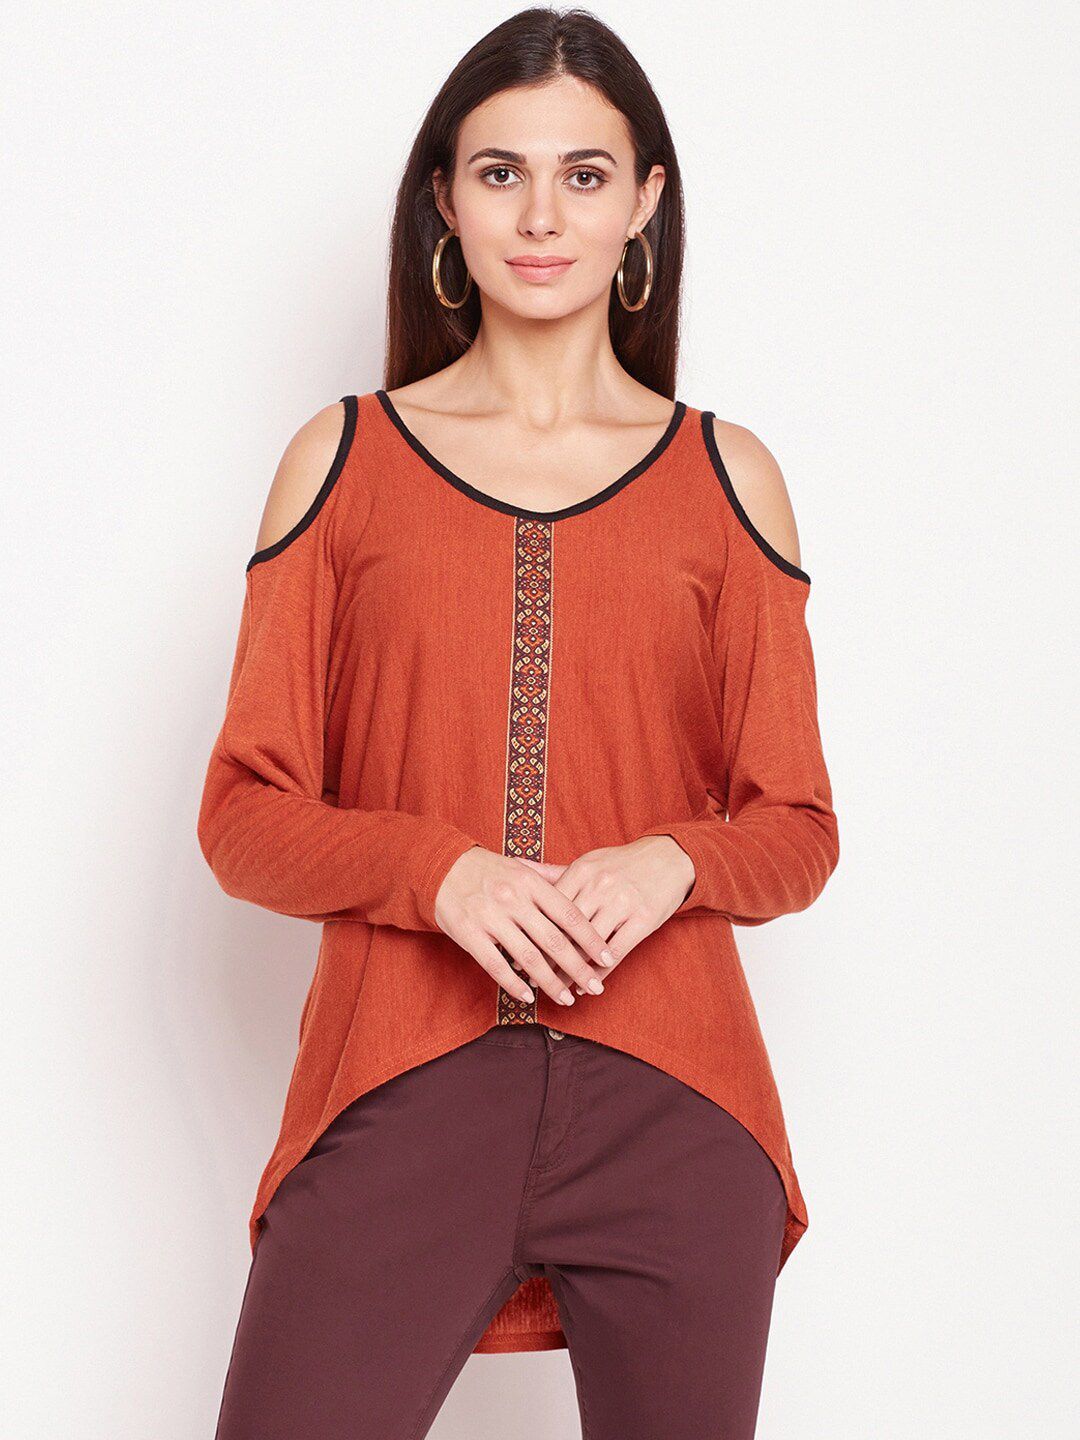 Be Indi Women High-Low Cotton Top Price in India